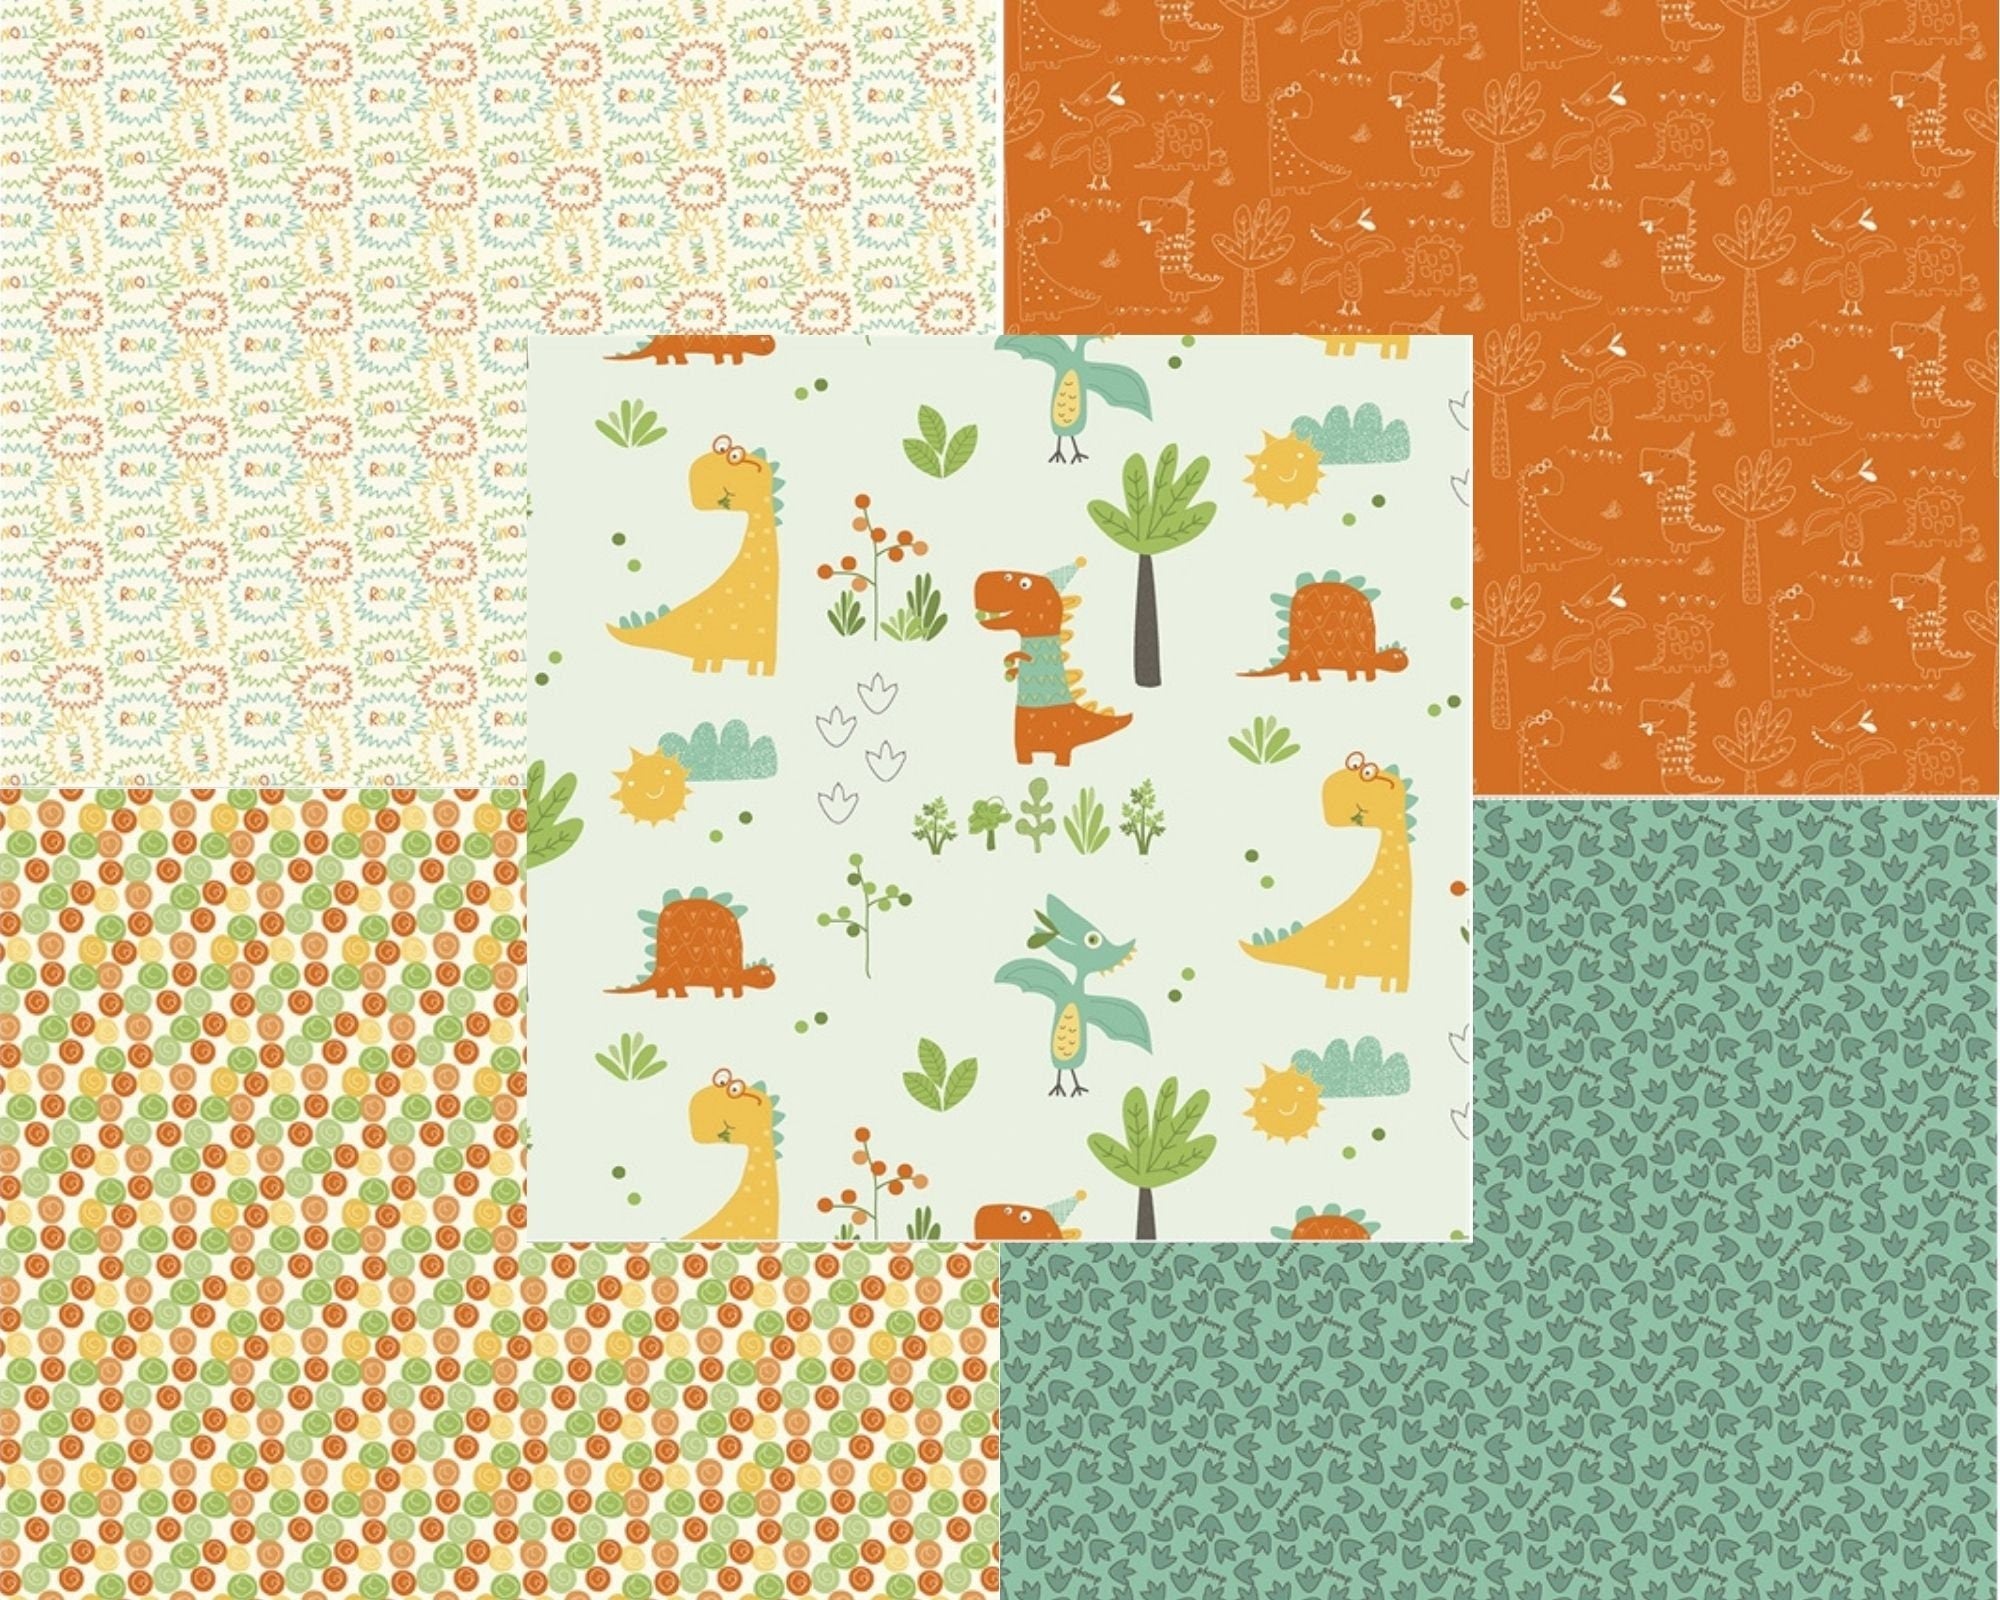 Dinosaur foot print on teal green fabric quilting cotton fabric - Eat Your Veggies by Riley Blake